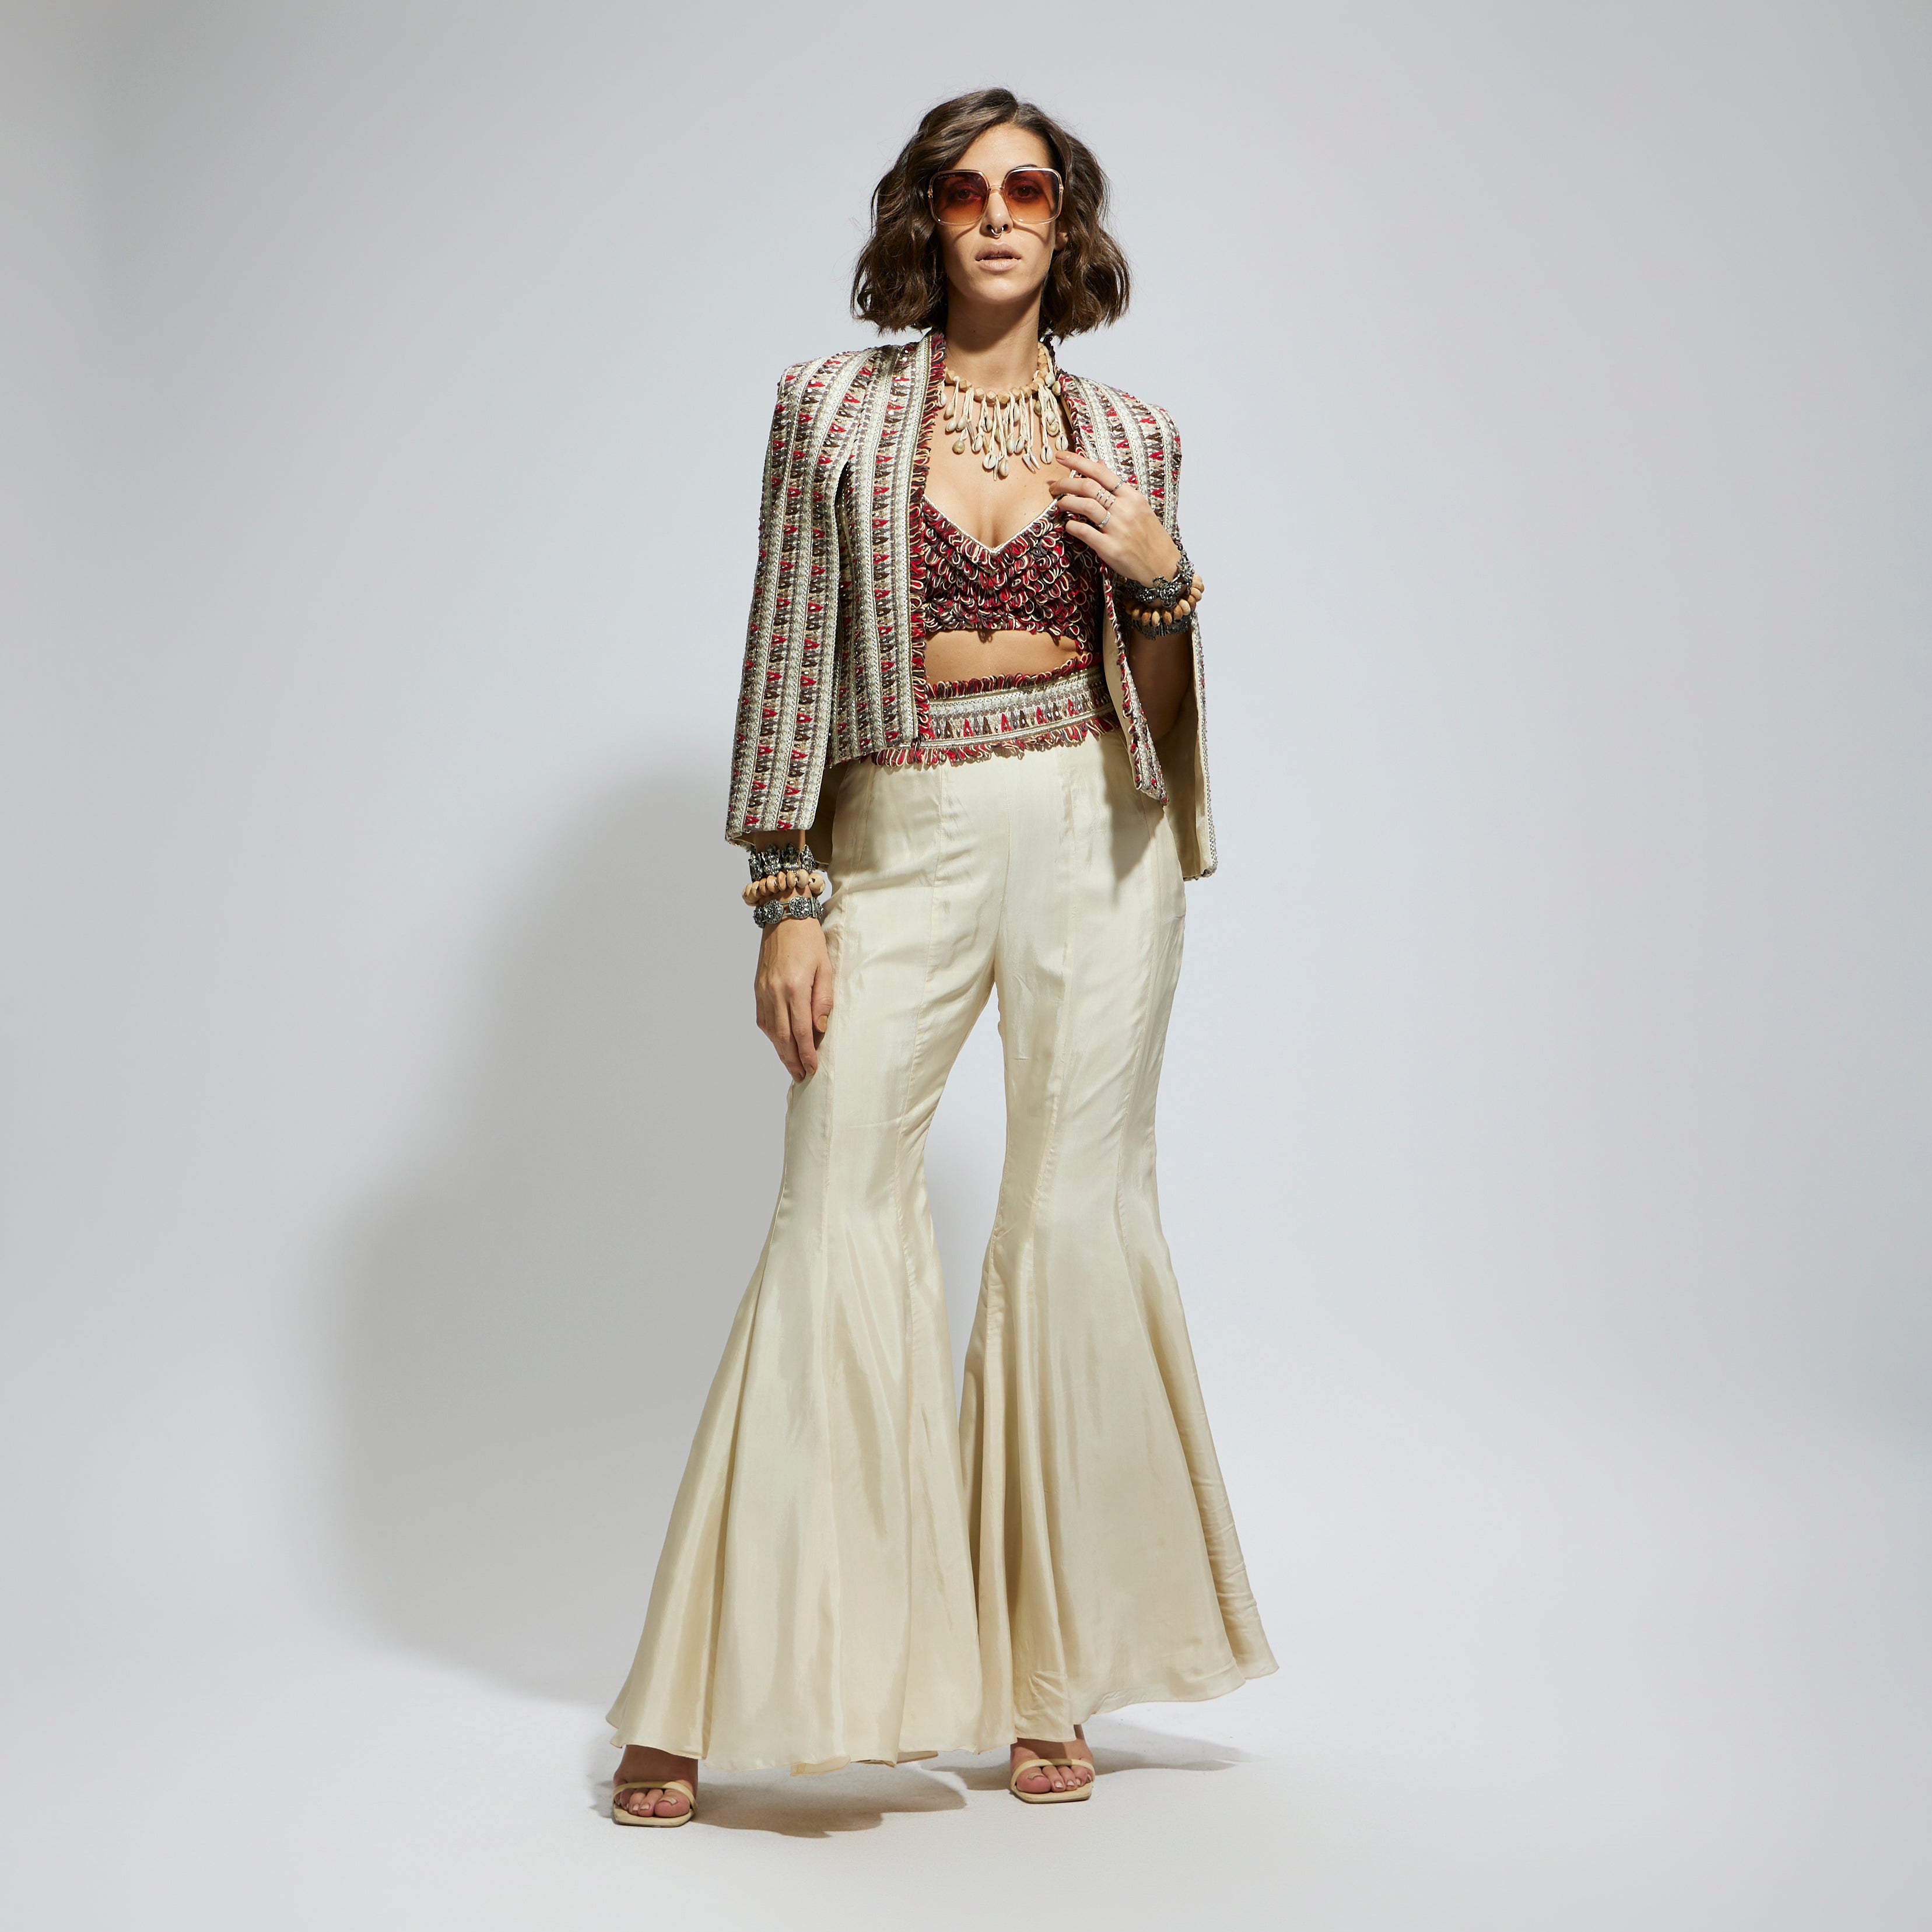 SAMSARA: IVORY EMBELLISHED CAPE JACKET PAIRED WITH TEXTURED BUSTIER AND SHARARA PANTS